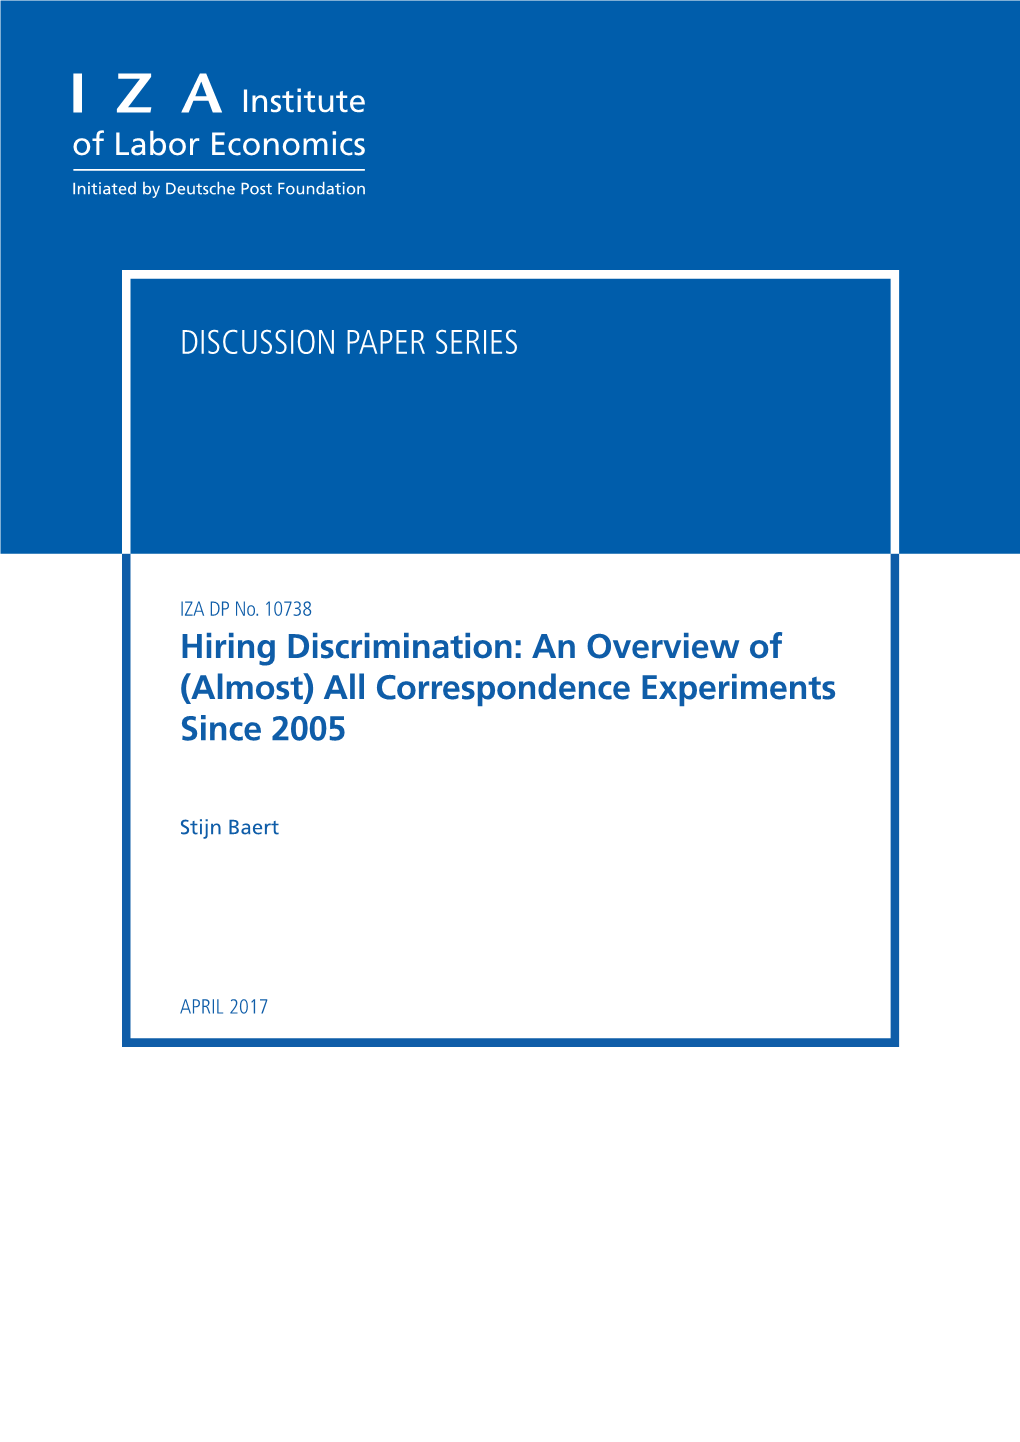 Hiring Discrimination: an Overview of (Almost) All Correspondence Experiments Since 2005